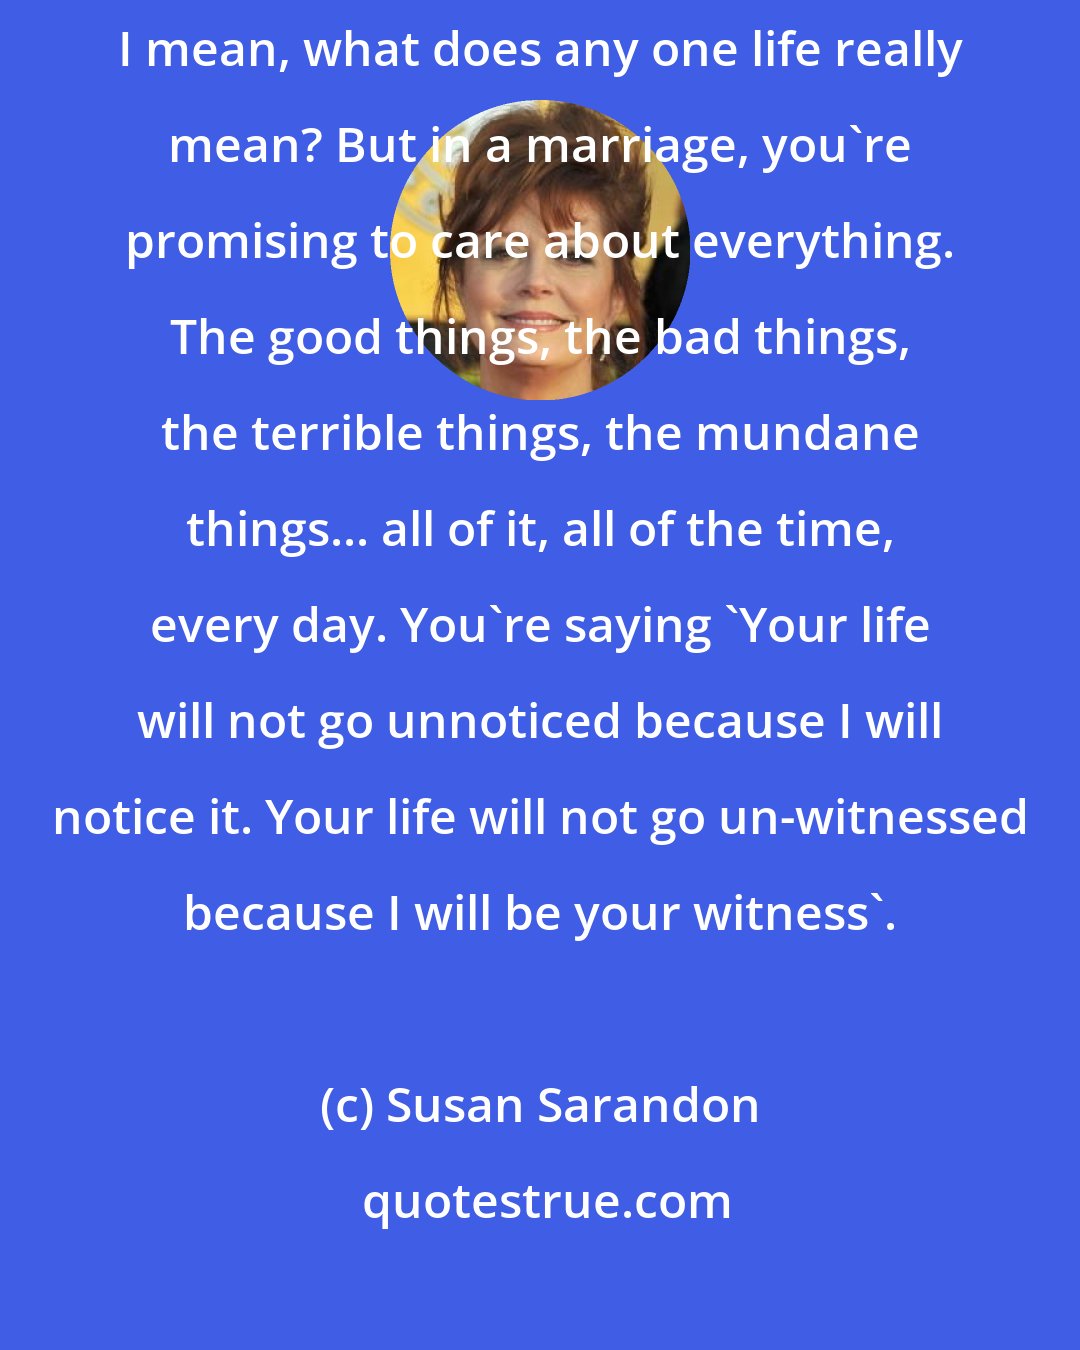 Susan Sarandon: We need a witness to our lives. There's a billion people on the planet... I mean, what does any one life really mean? But in a marriage, you're promising to care about everything. The good things, the bad things, the terrible things, the mundane things... all of it, all of the time, every day. You're saying 'Your life will not go unnoticed because I will notice it. Your life will not go un-witnessed because I will be your witness'.